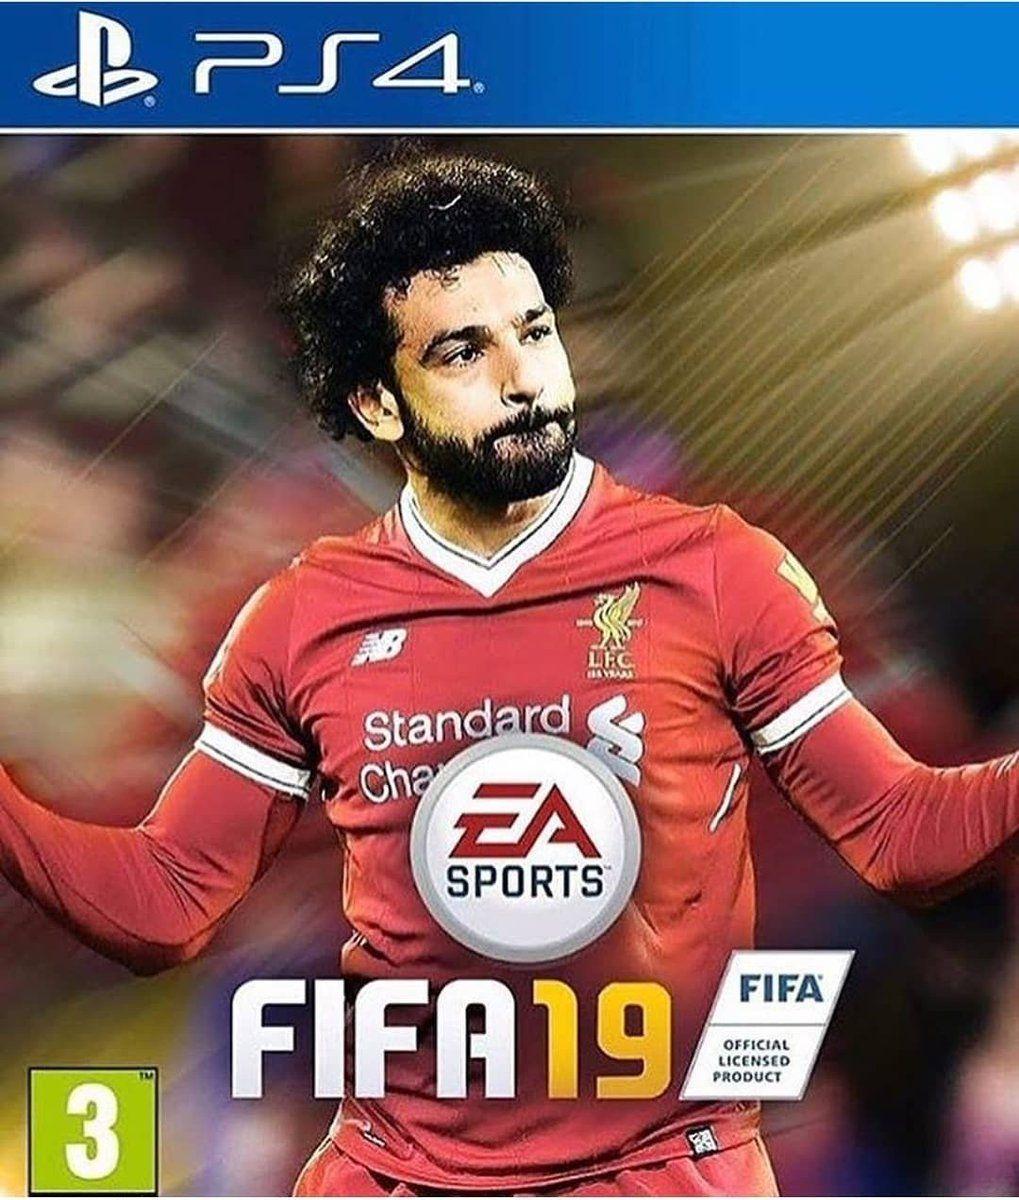 FIFA 19 could have an unexpected cover star